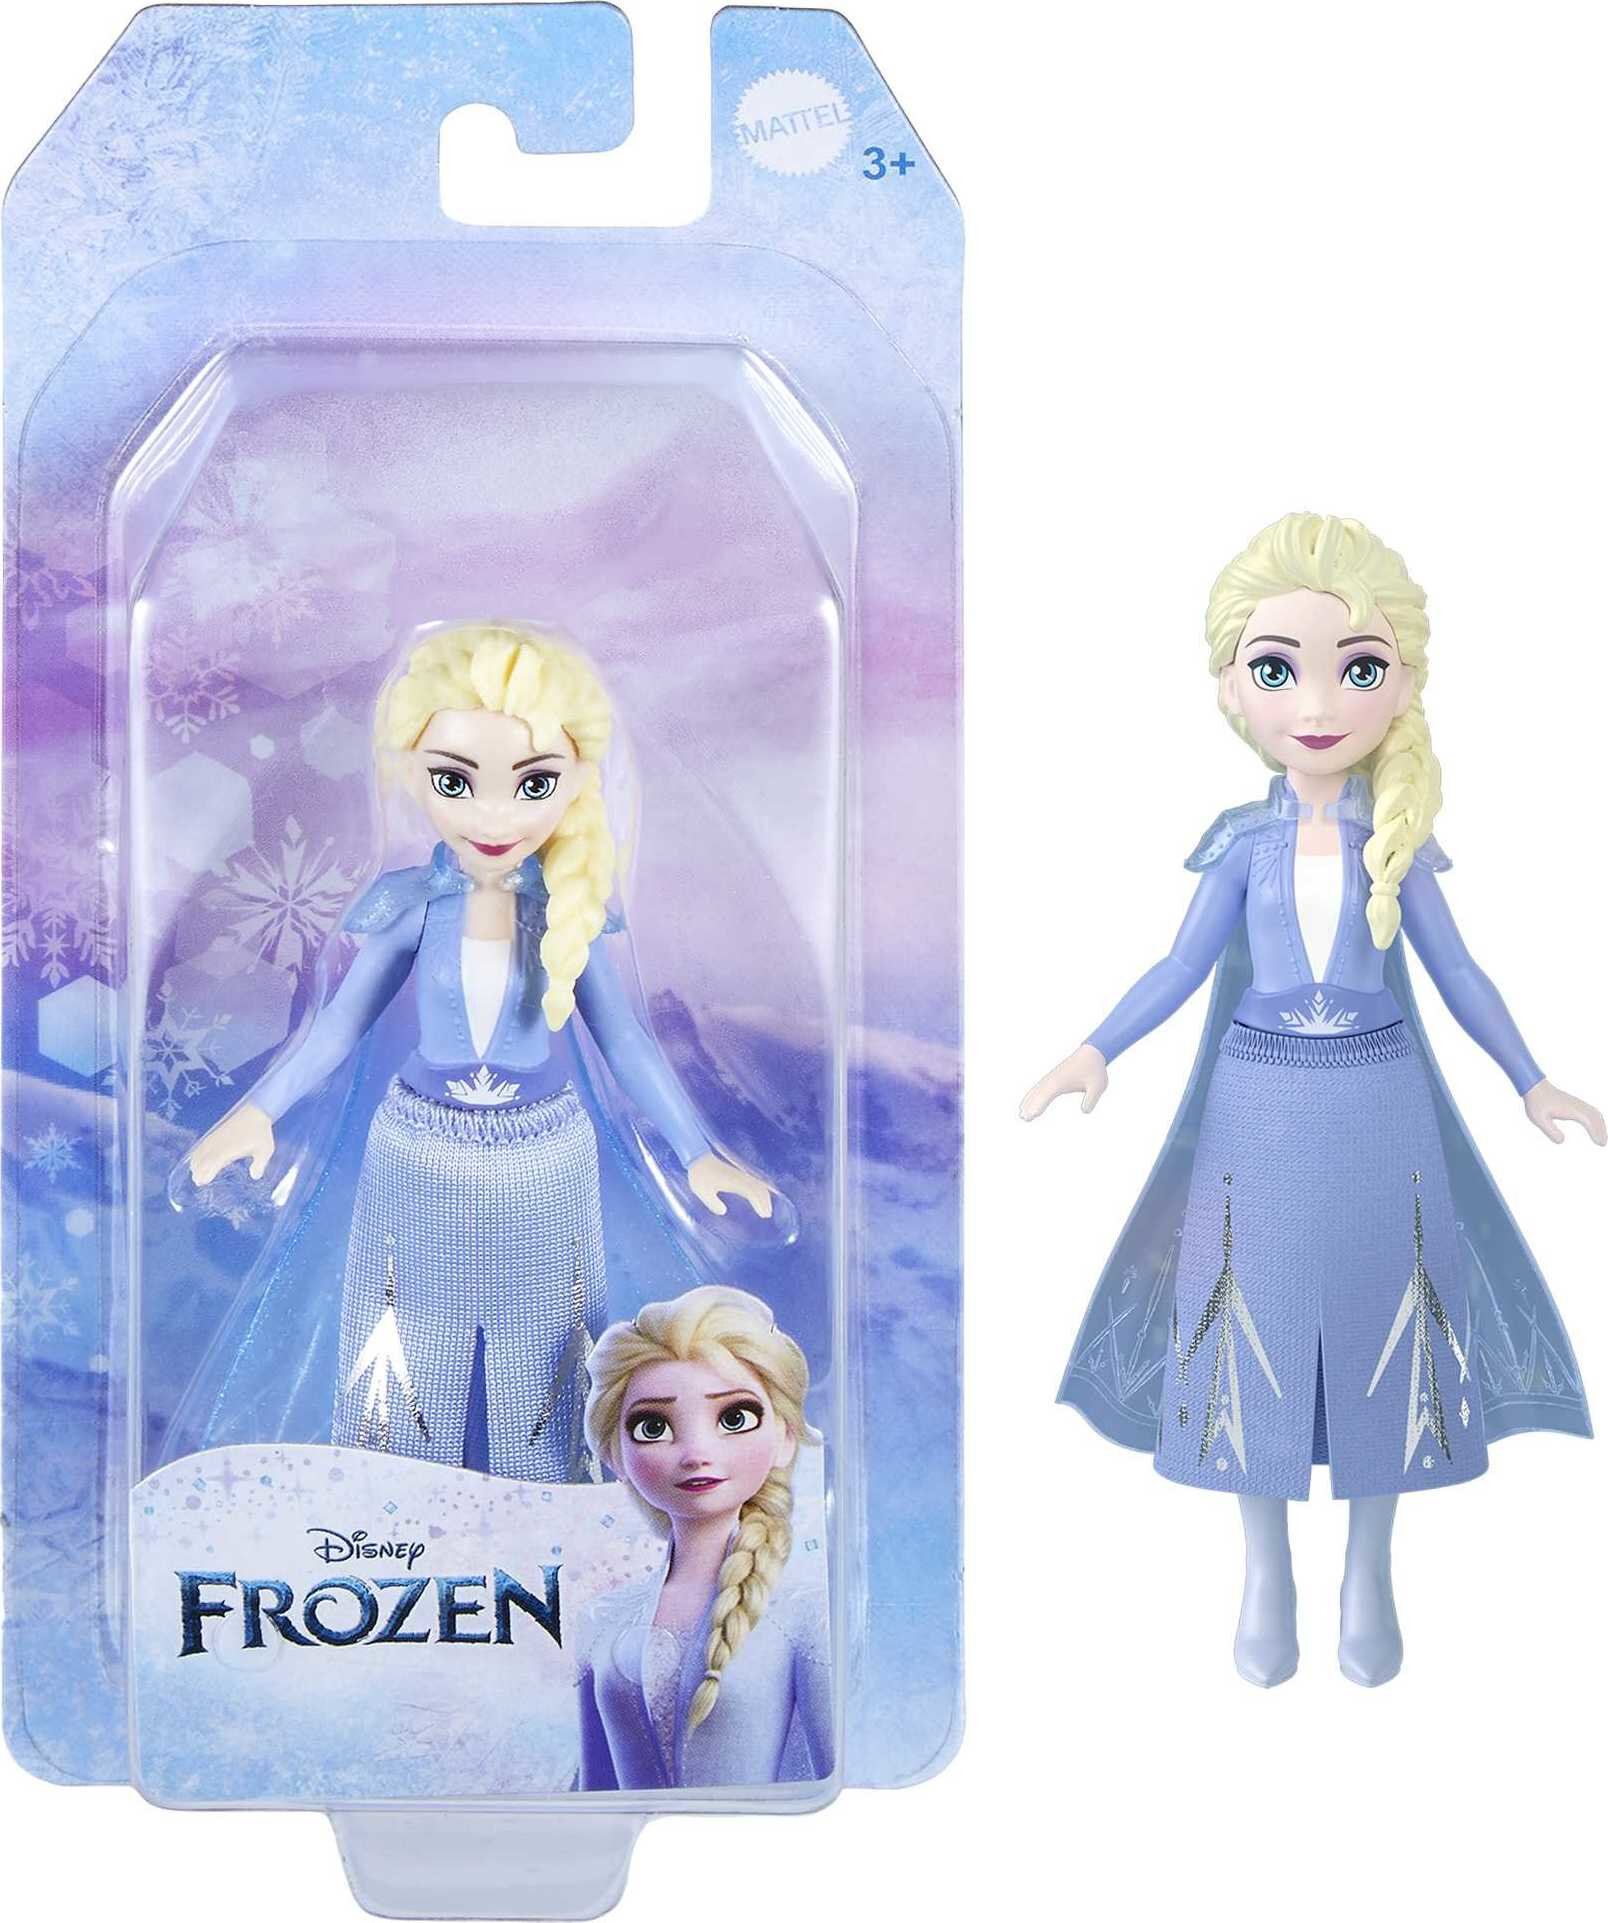 Disney Frozen Elsa Small Doll in Travel Look, Posable with Removable Cape & Skirt - image 1 of 6